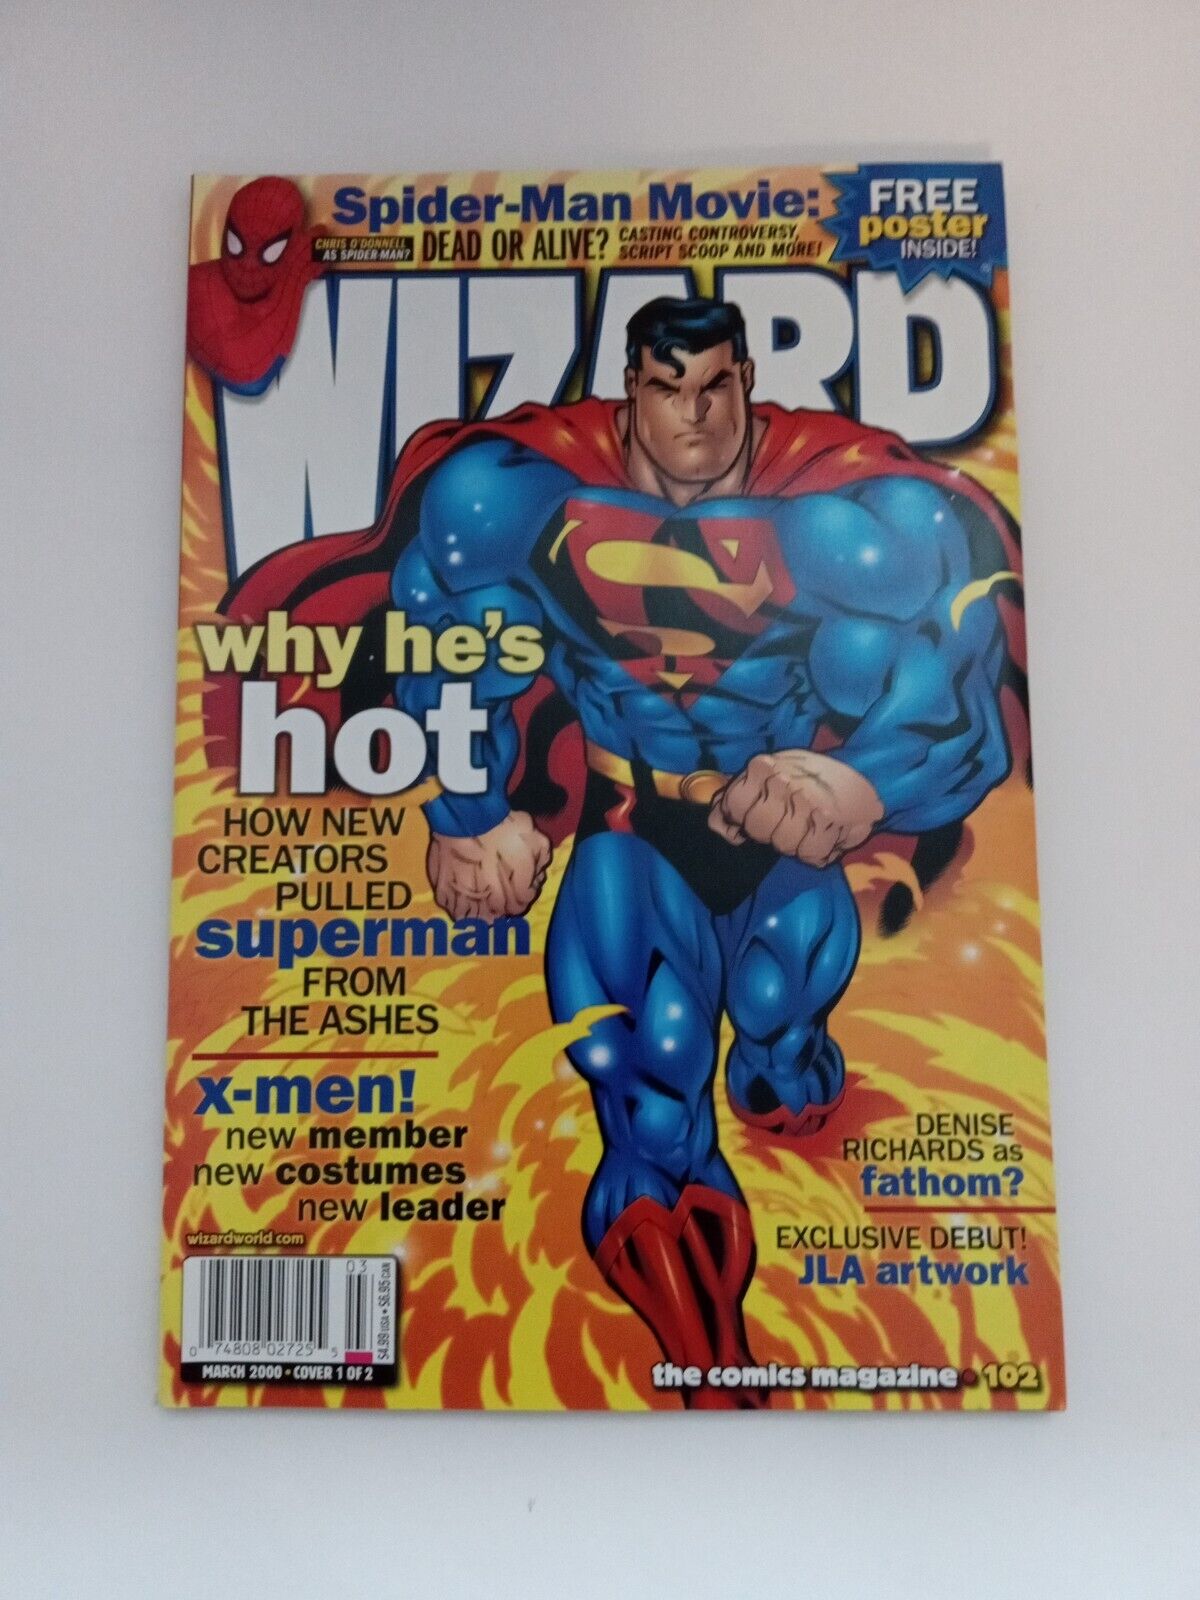 WIZARD: The Comics Magazine, March 2000, Cover 1 of 2 Issue 102